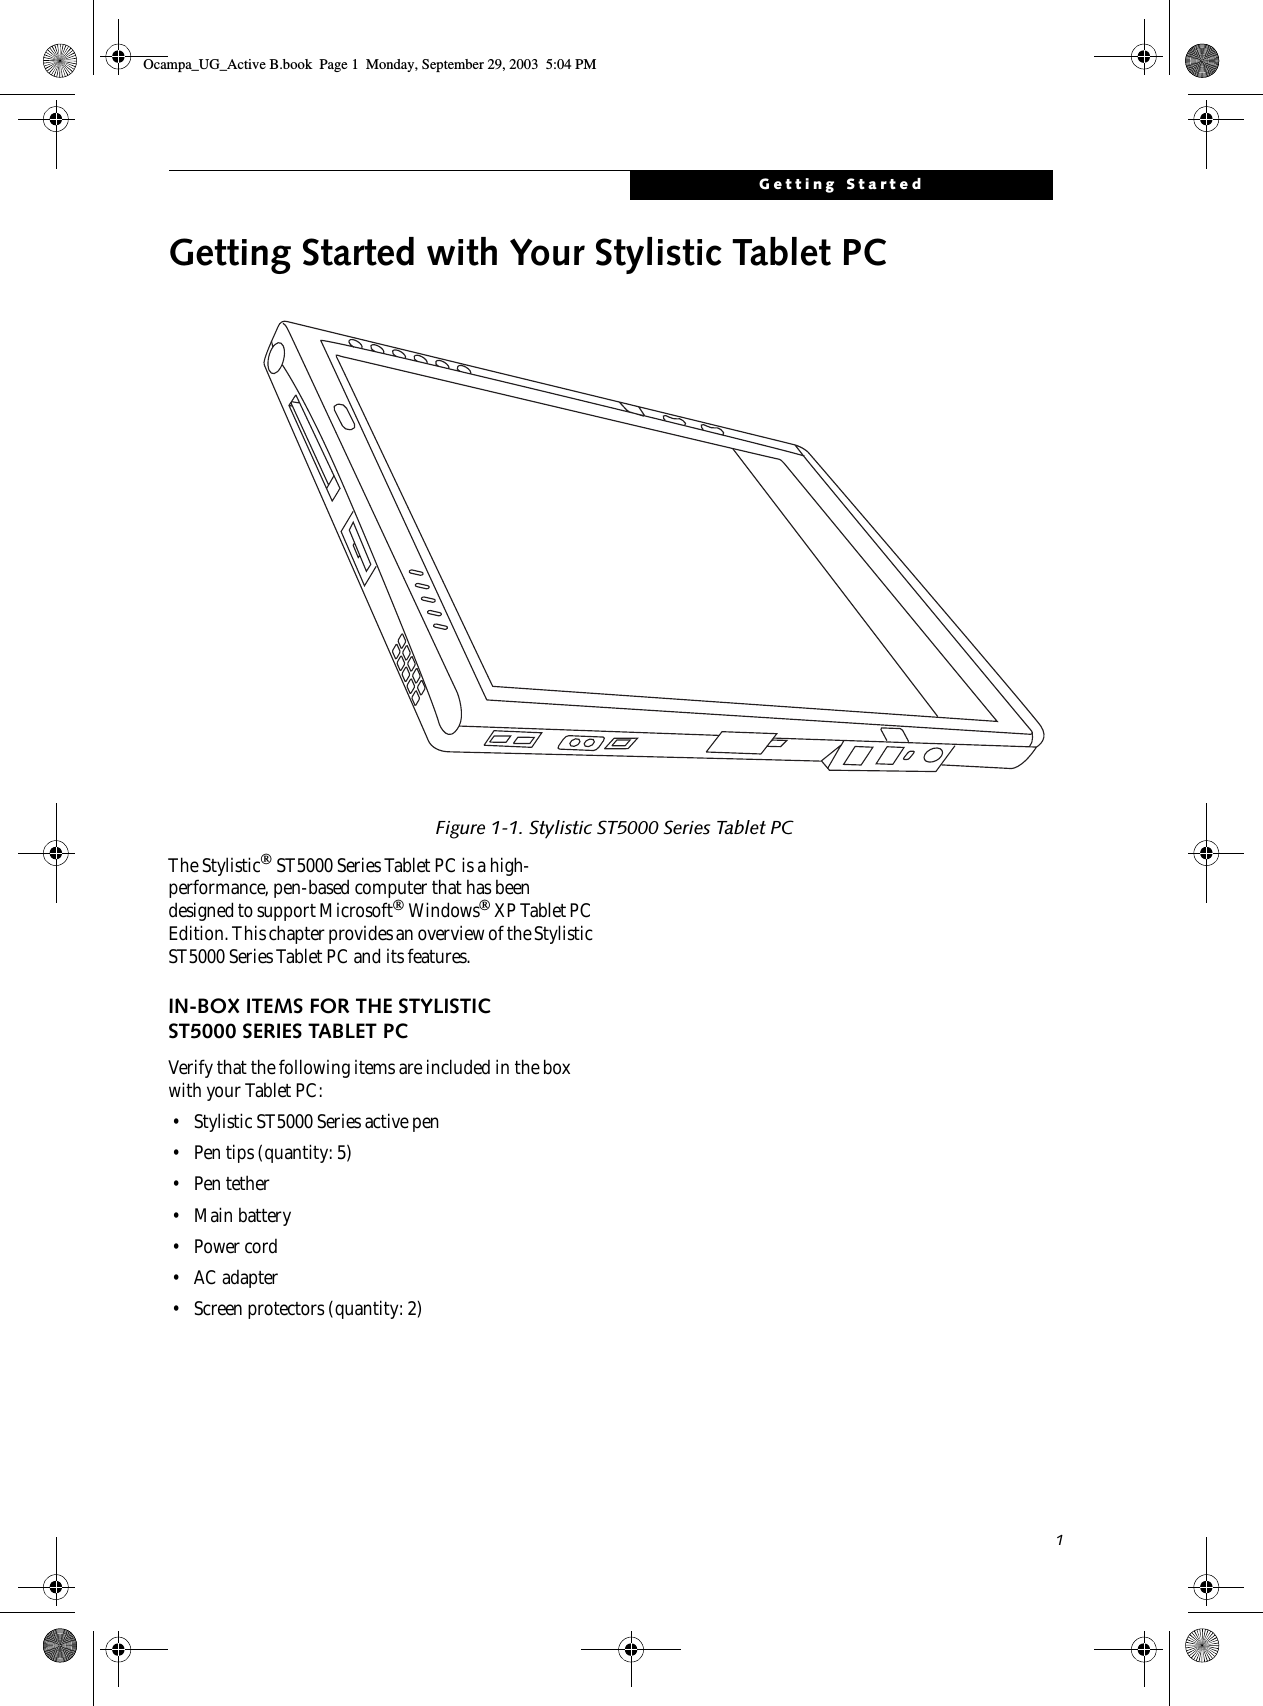 1Getting StartedGetting Started with Your Stylistic Tablet PCFigure 1-1. Stylistic ST5000 Series Tablet PCThe Stylistic ST5000 Series Tablet PC is a high-performance, pen-based computer that has been designed to support Microsoft Windows XP Tablet PC Edition. This chapter provides an overview of the Stylistic ST5000 Series Tablet PC and its features.IN-BOX ITEMS FOR THE STYLISTIC ST5000 SERIES TABLET PCVerify that the following items are included in the box with your Tablet PC: • Stylistic ST5000 Series active pen• Pen tips (quantity: 5)•Pen tether• Main battery •Power cord• AC adapter• Screen protectors (quantity: 2)Ocampa_UG_Active B.book  Page 1  Monday, September 29, 2003  5:04 PM